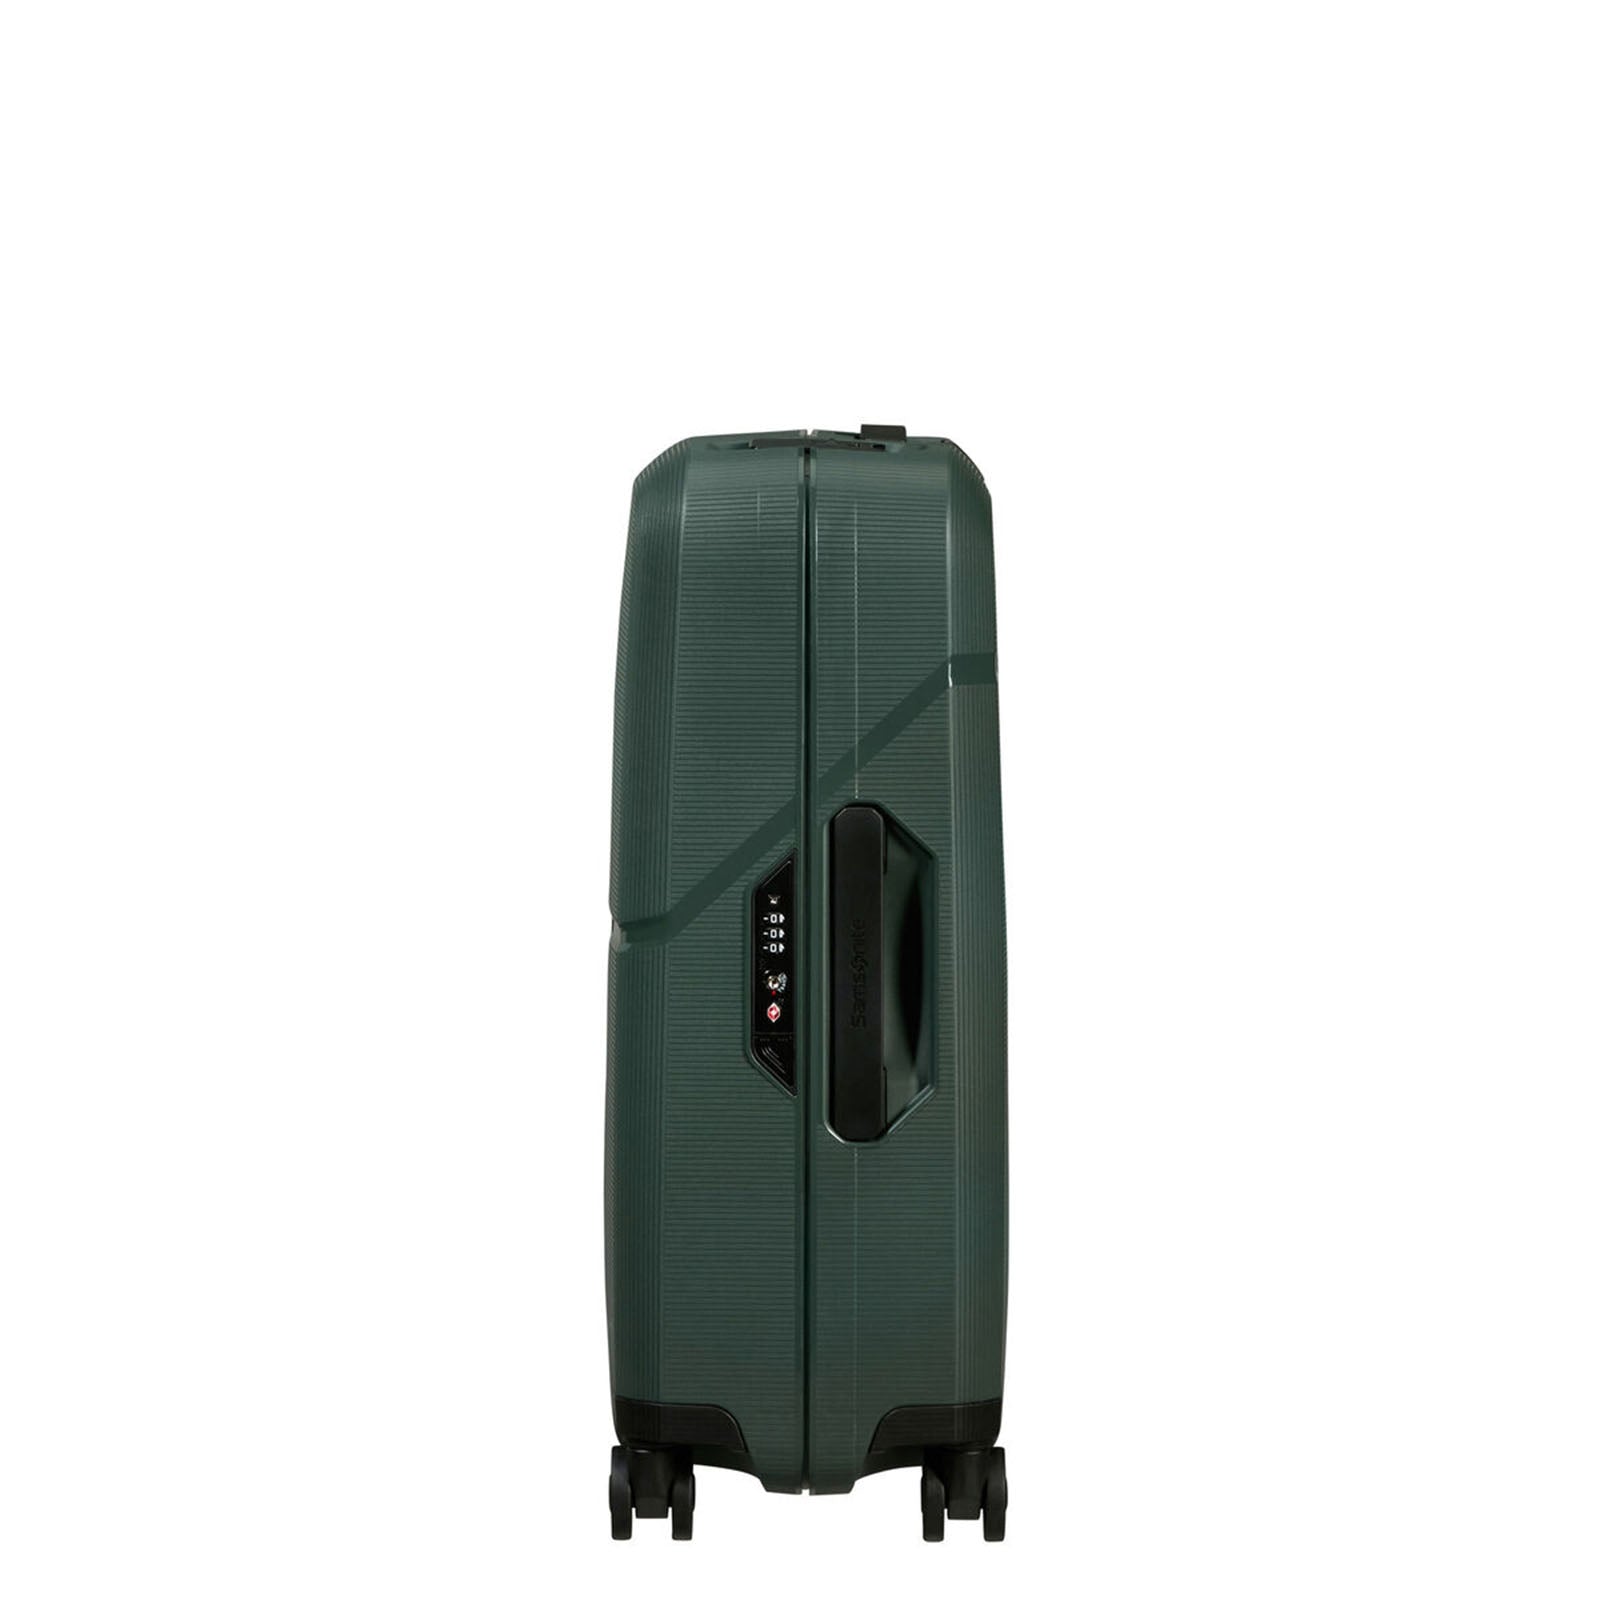 Samsonite-Magnum-Eco-55cm-Carry-On-Suitcase-Forest-Green-Side-Handle